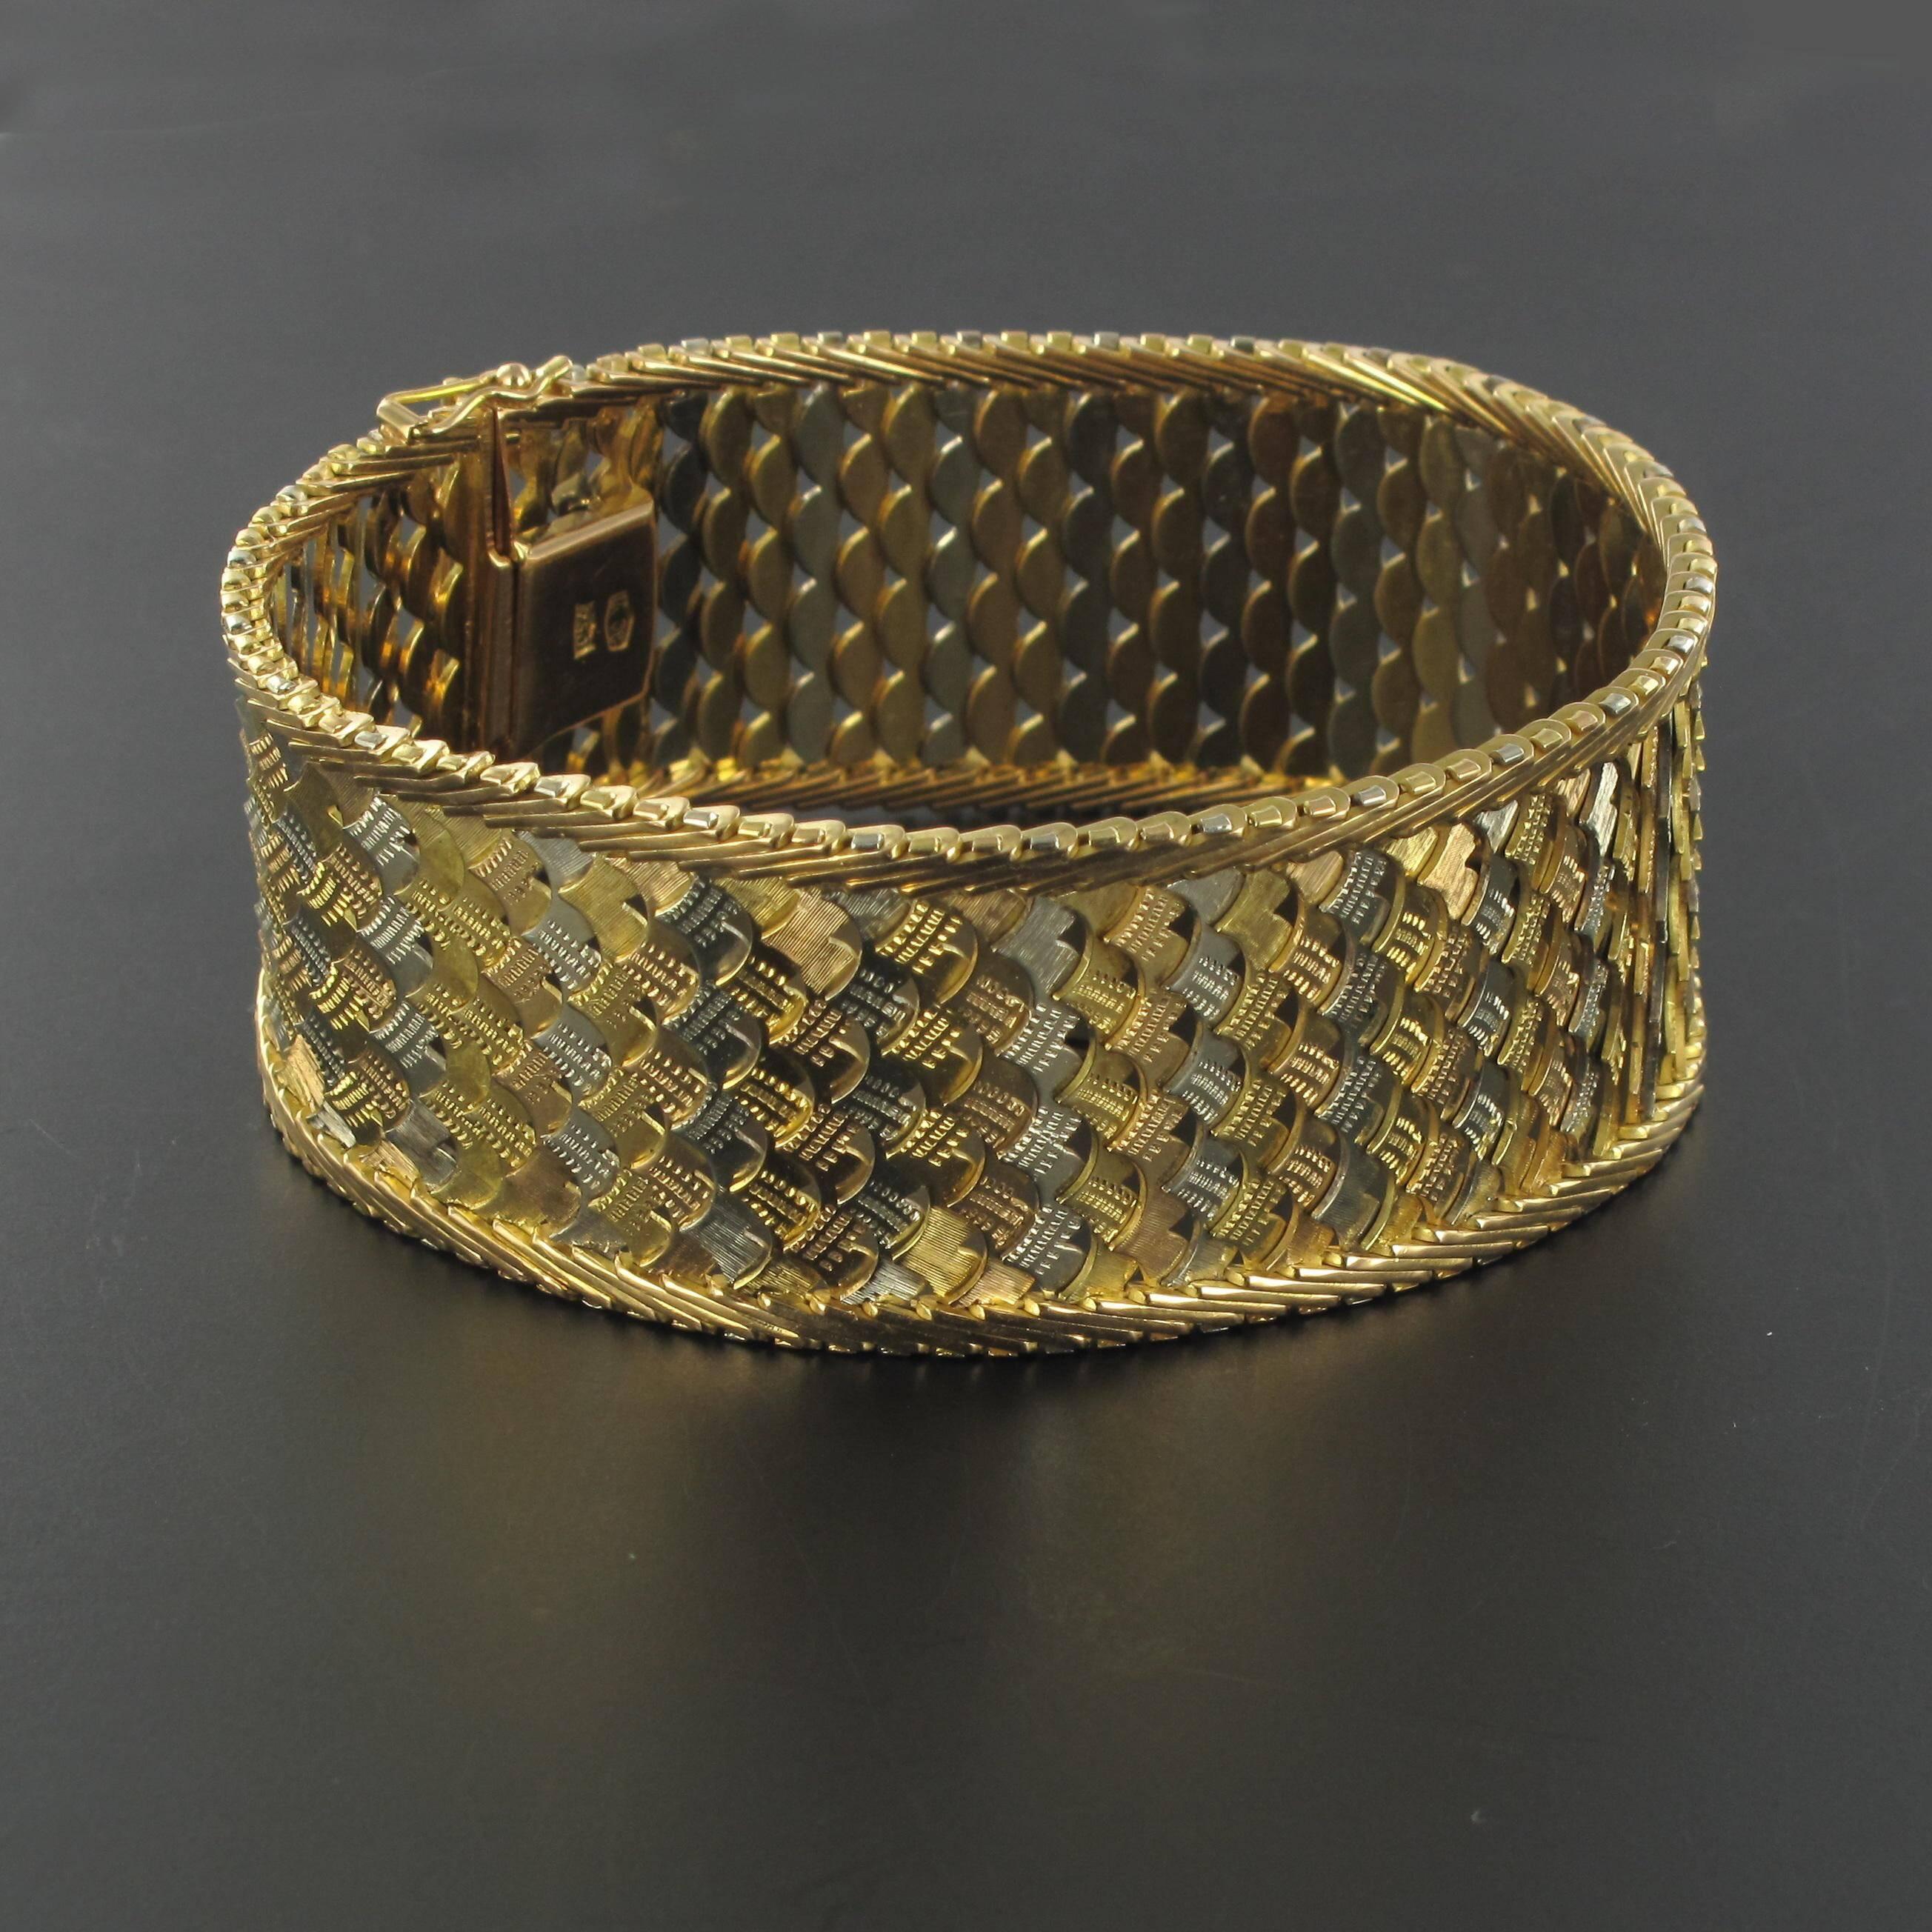 Bracelet in 18 carat yellow gold and white gold.
This magnificent bracelet is composed of openwork chiselled and woven white and yellow gold edged with golden ears of wheat. This flexible bracelet from the 1960s rests comfortably on the wrist and